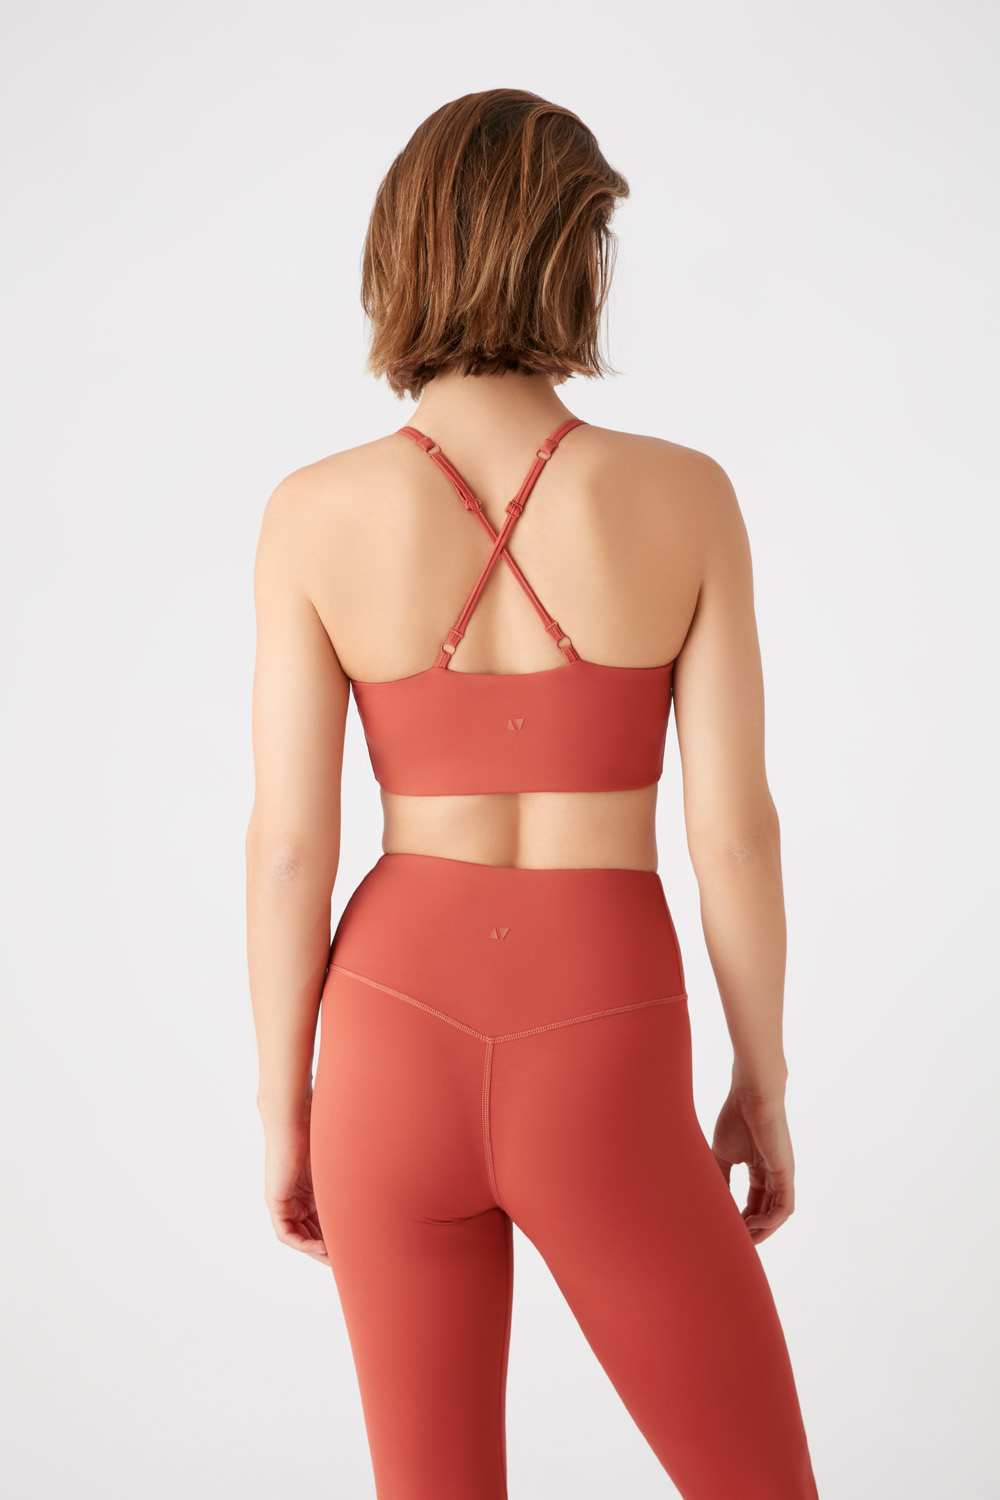 16 Sustainable Activewear Brands For Your Fitness Goals